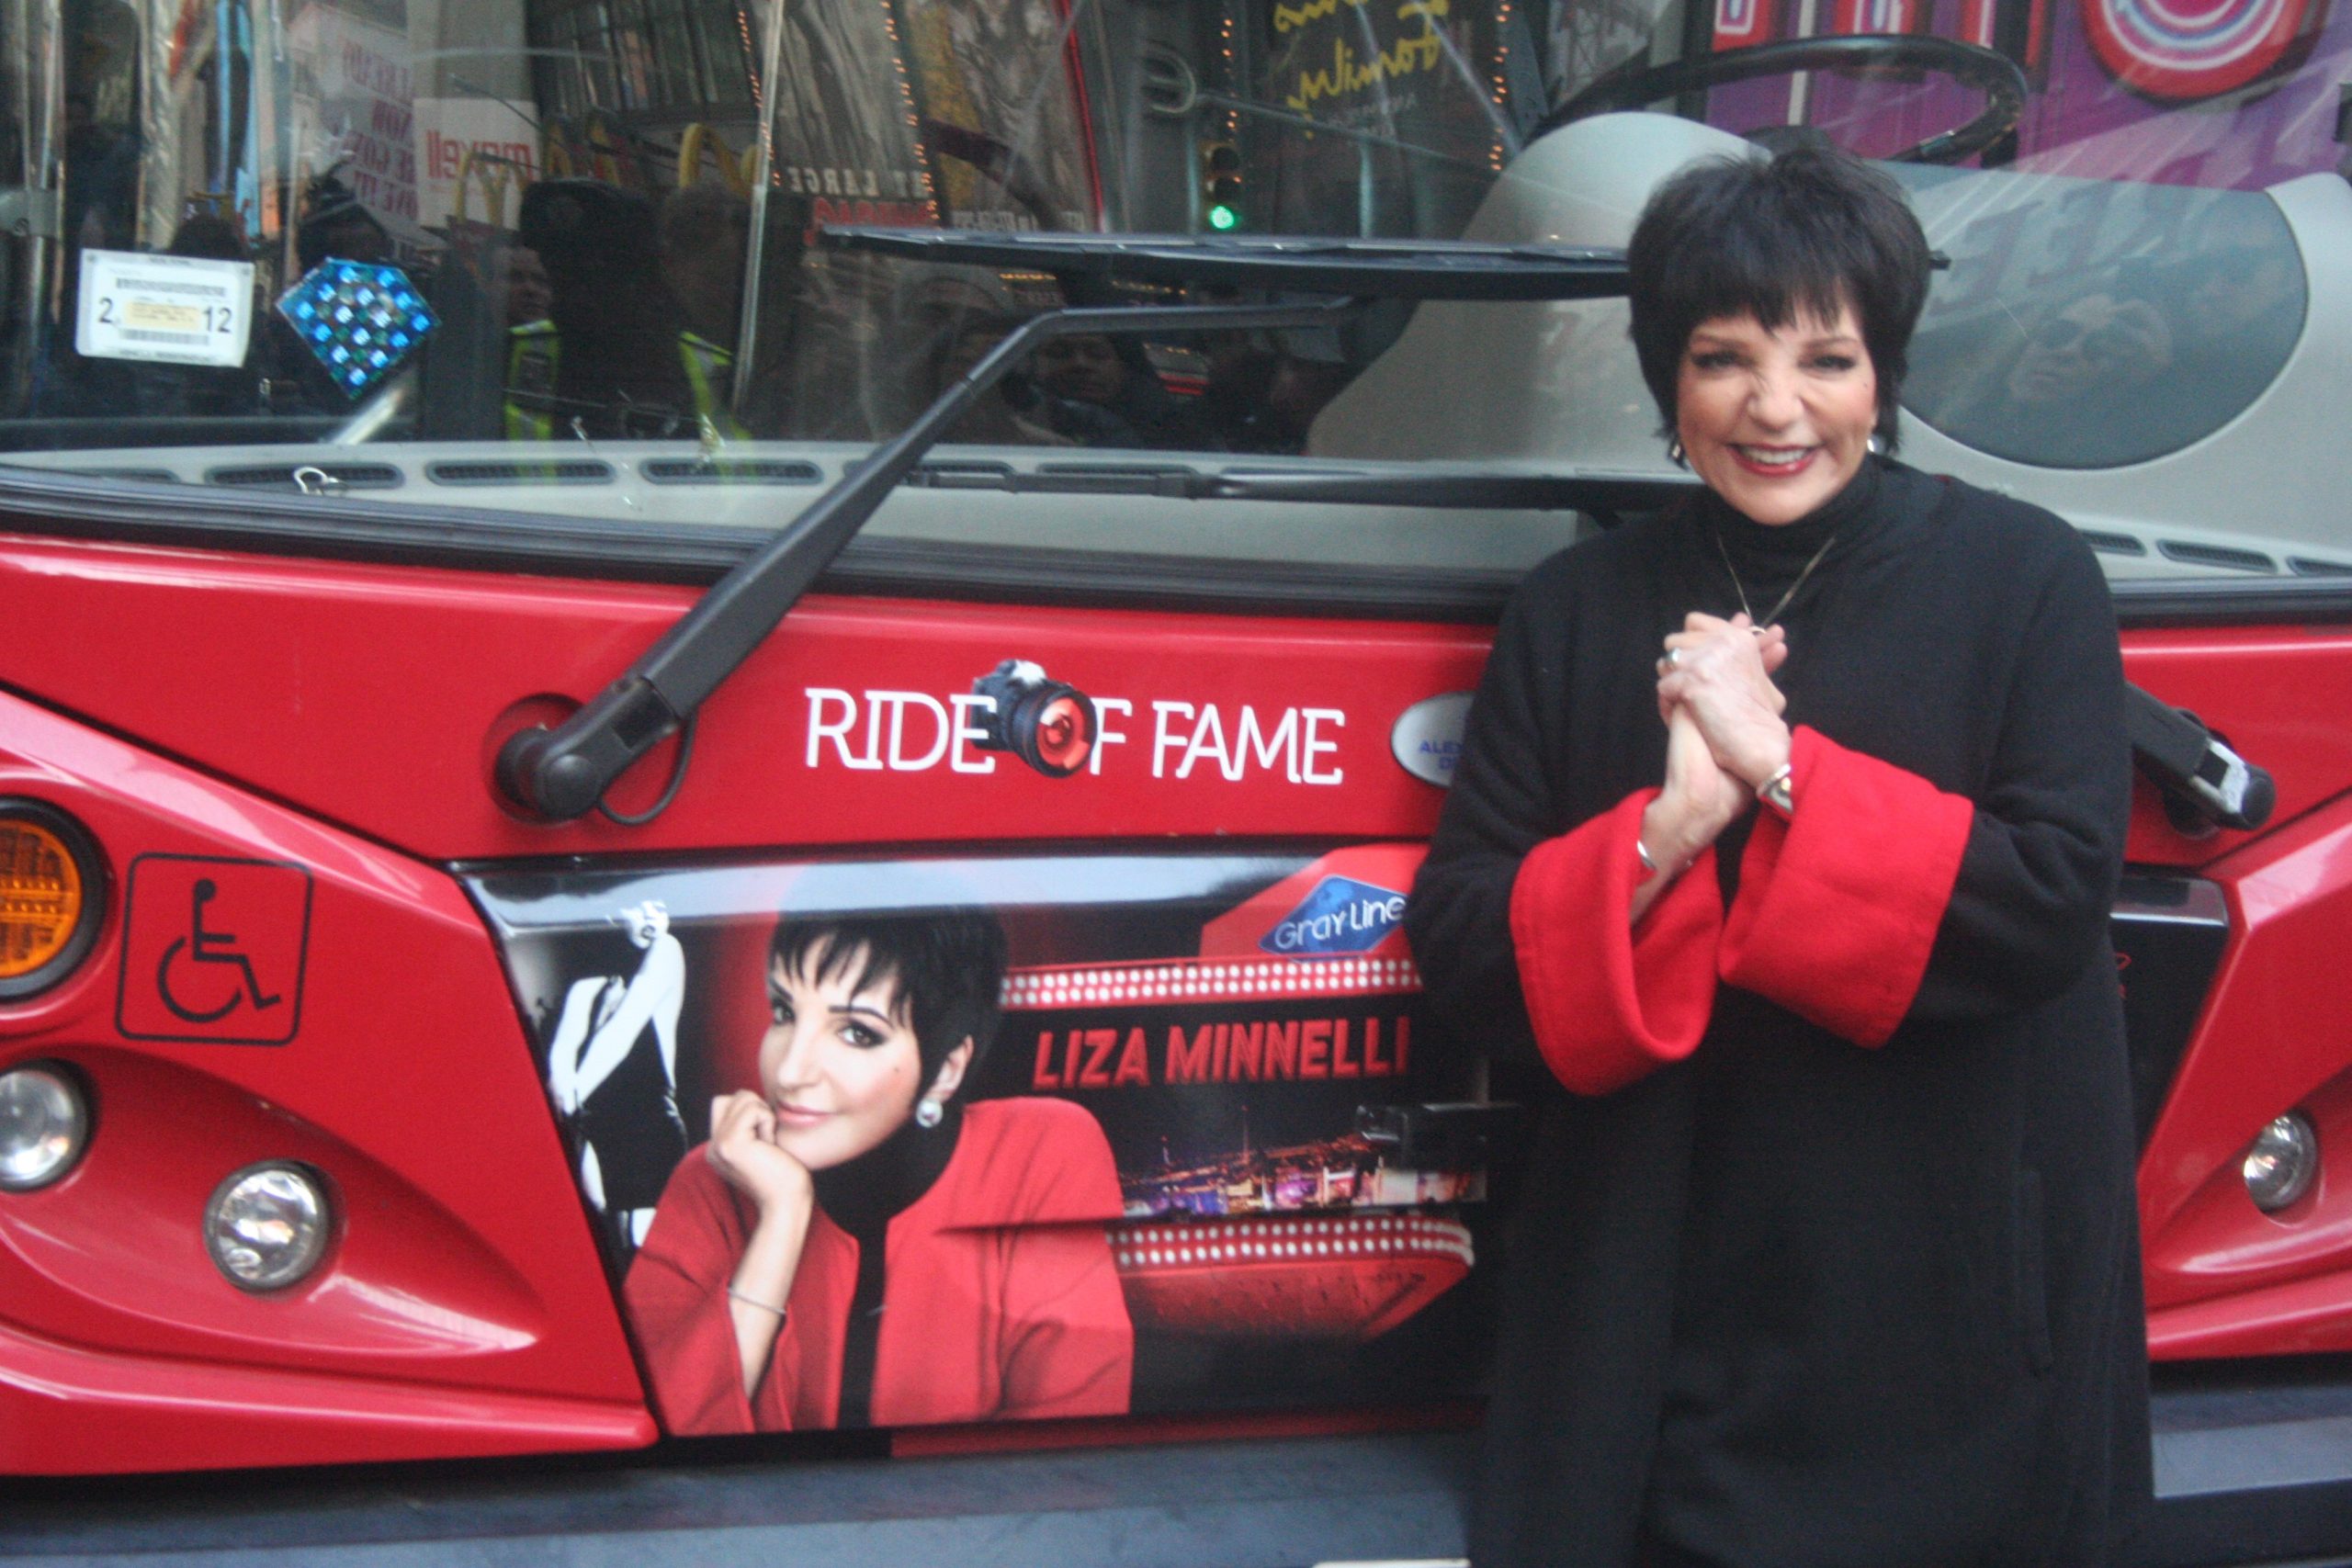 liza_minnelli__legend_and_new_york_icon_liza_minnelli_honored_in_gray_line_new_yorks__ride_of_fame_